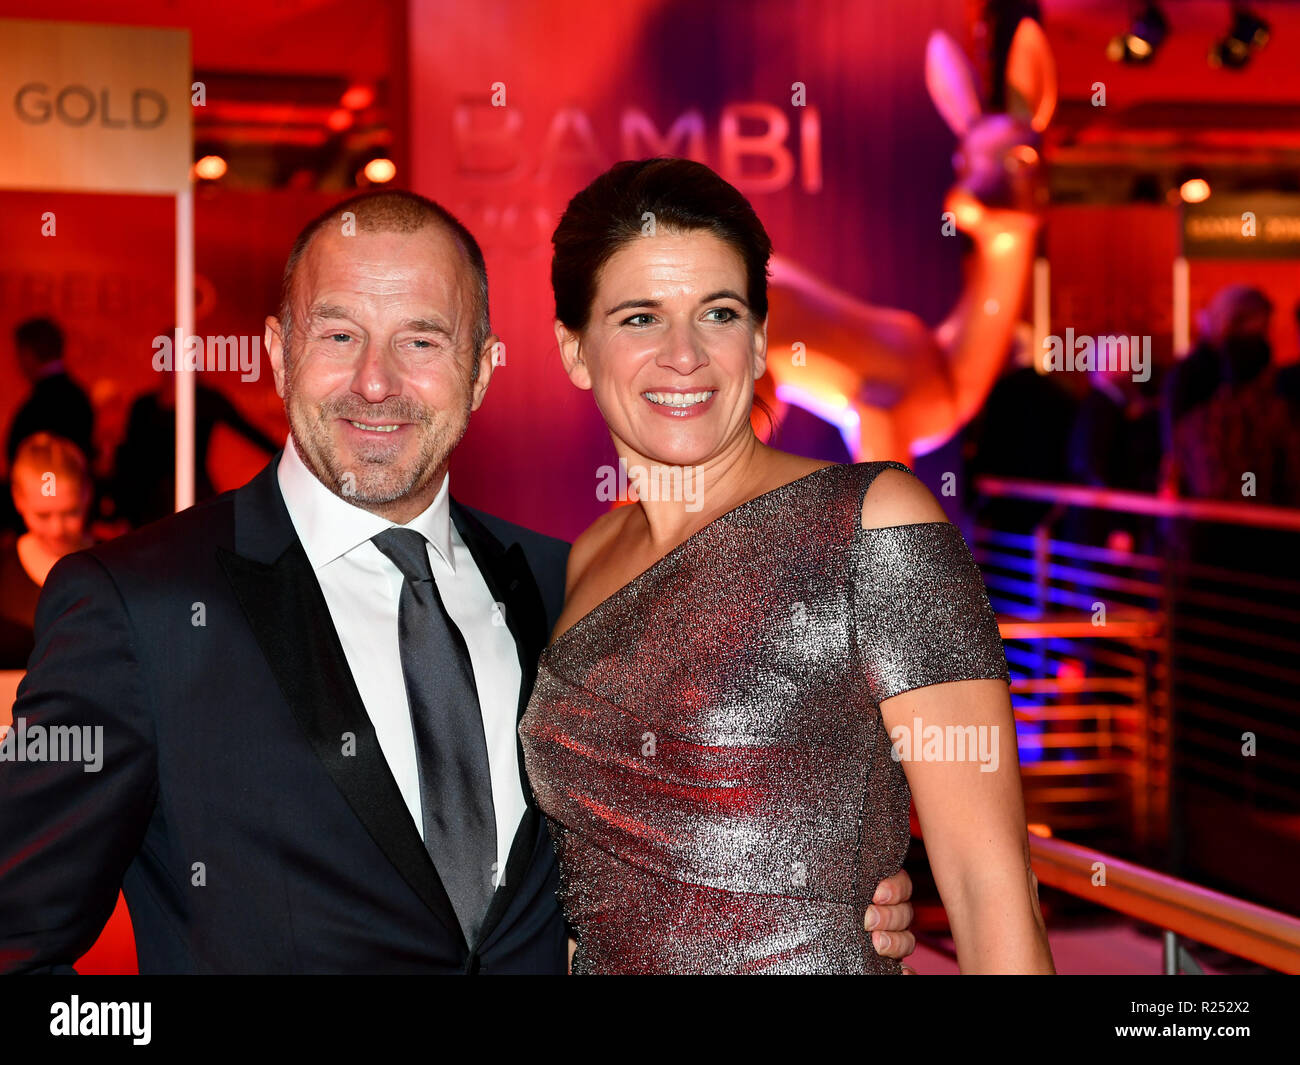 Berlin, Germany. 16th Nov, 2018. Heino Ferch and his wife Marie-Jeanette Ferch at the pre-reception of the 70th Bambi Media Prize in the Stage Theater. Credit: Soeren Stache/dpa/Alamy Live News Stock Photo